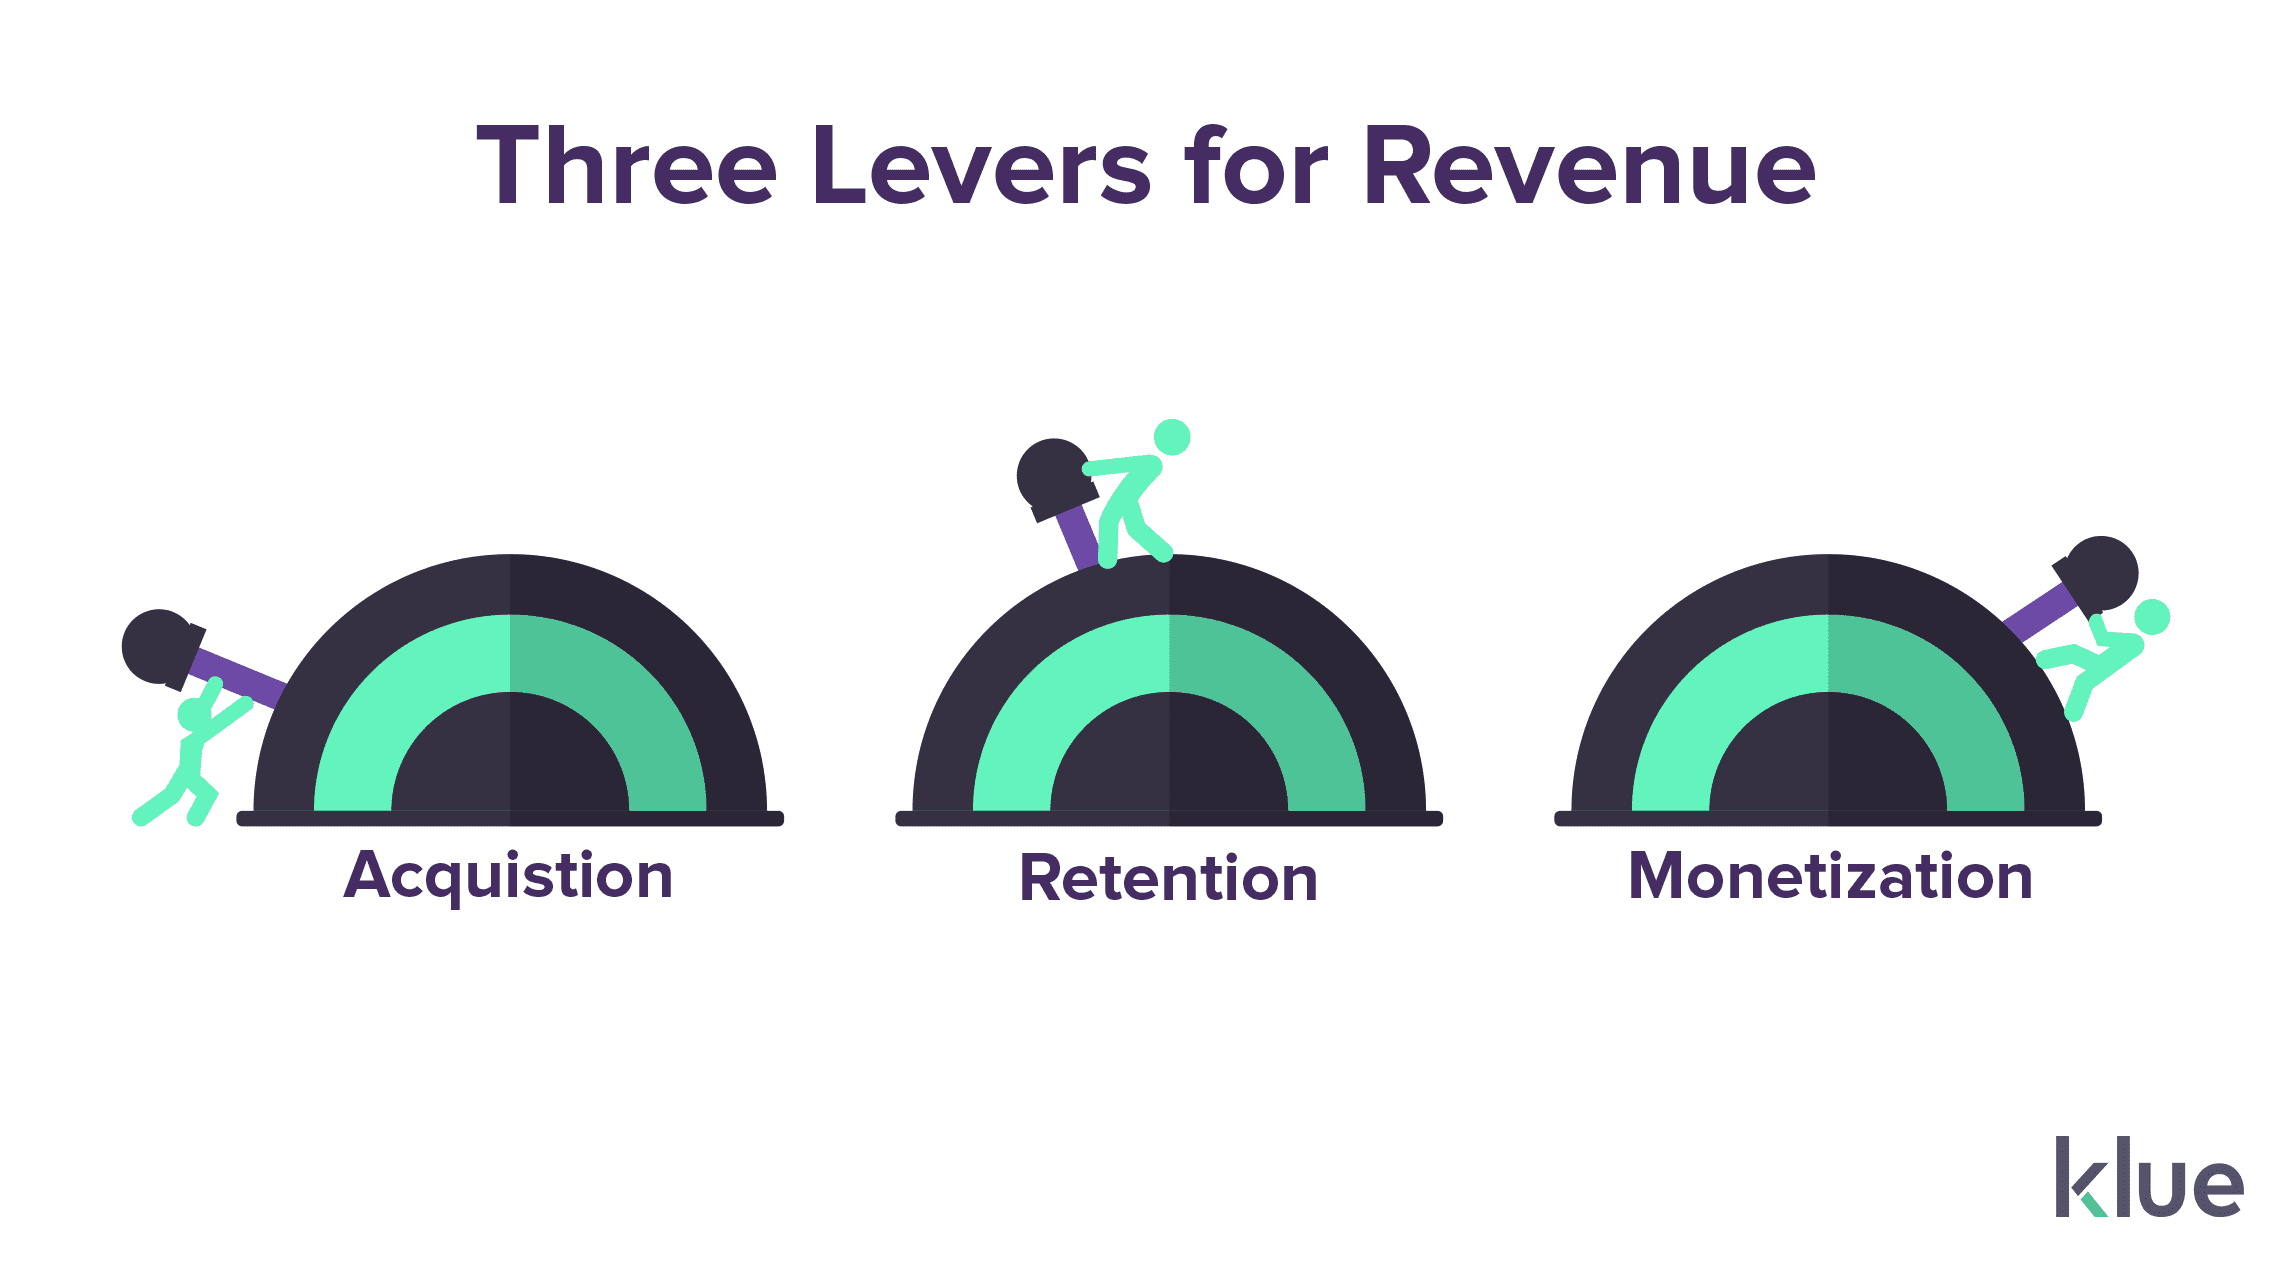 Customer retention, customer acquisition, and monetization are the three critical financial levers to revenue